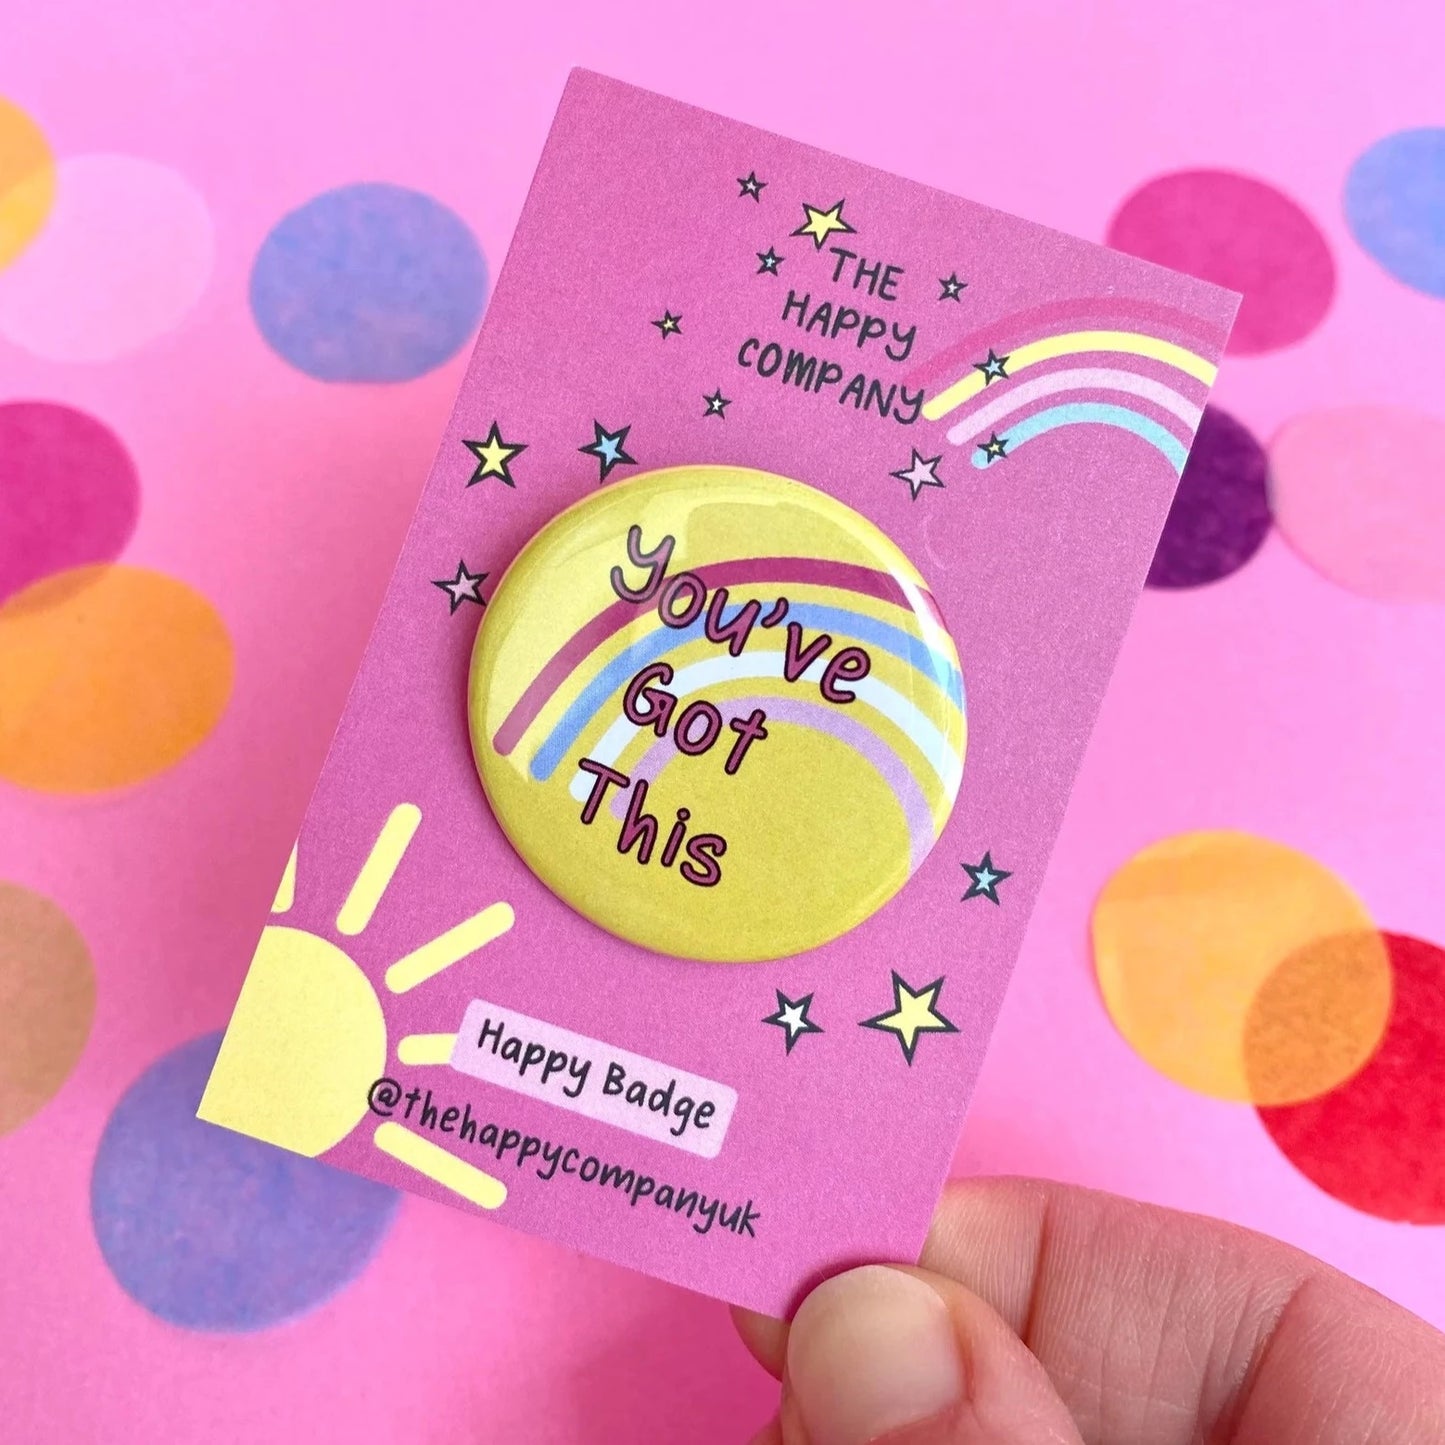 You've got this affirmation Pin Badge